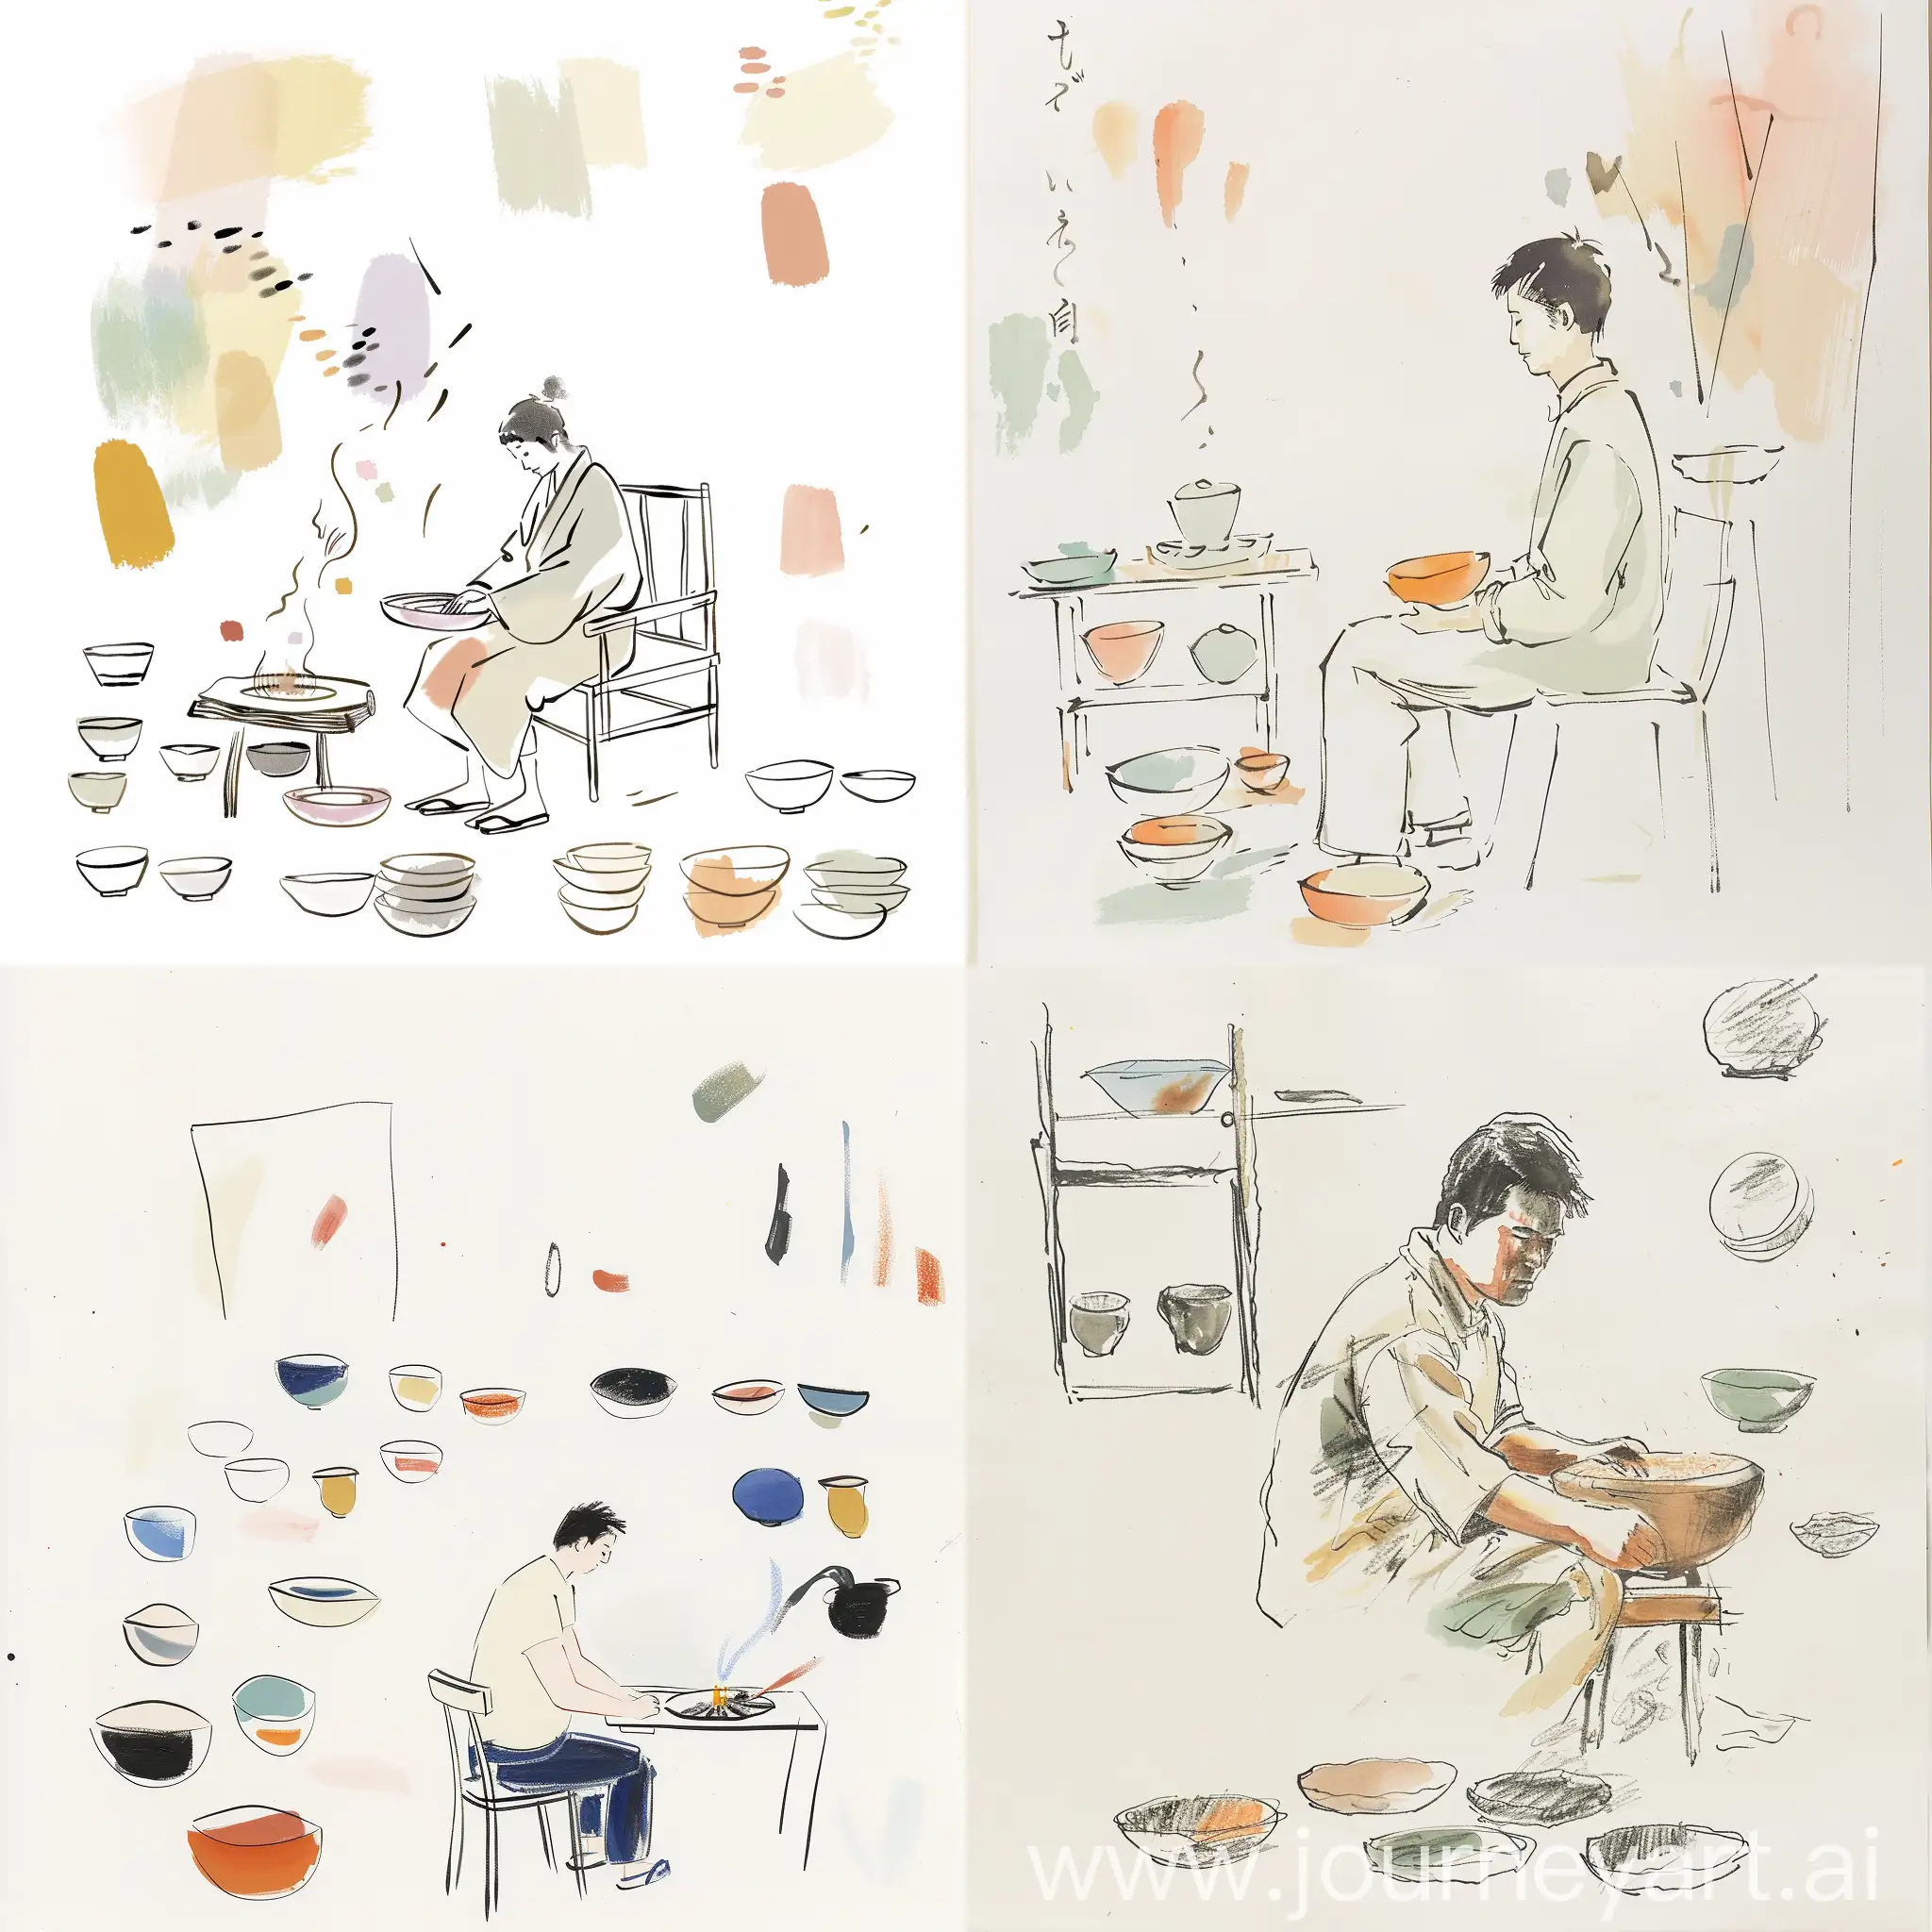 Japanese-Man-Crafting-Bowls-Peaceful-Pastel-Scene-of-Creative-Expression